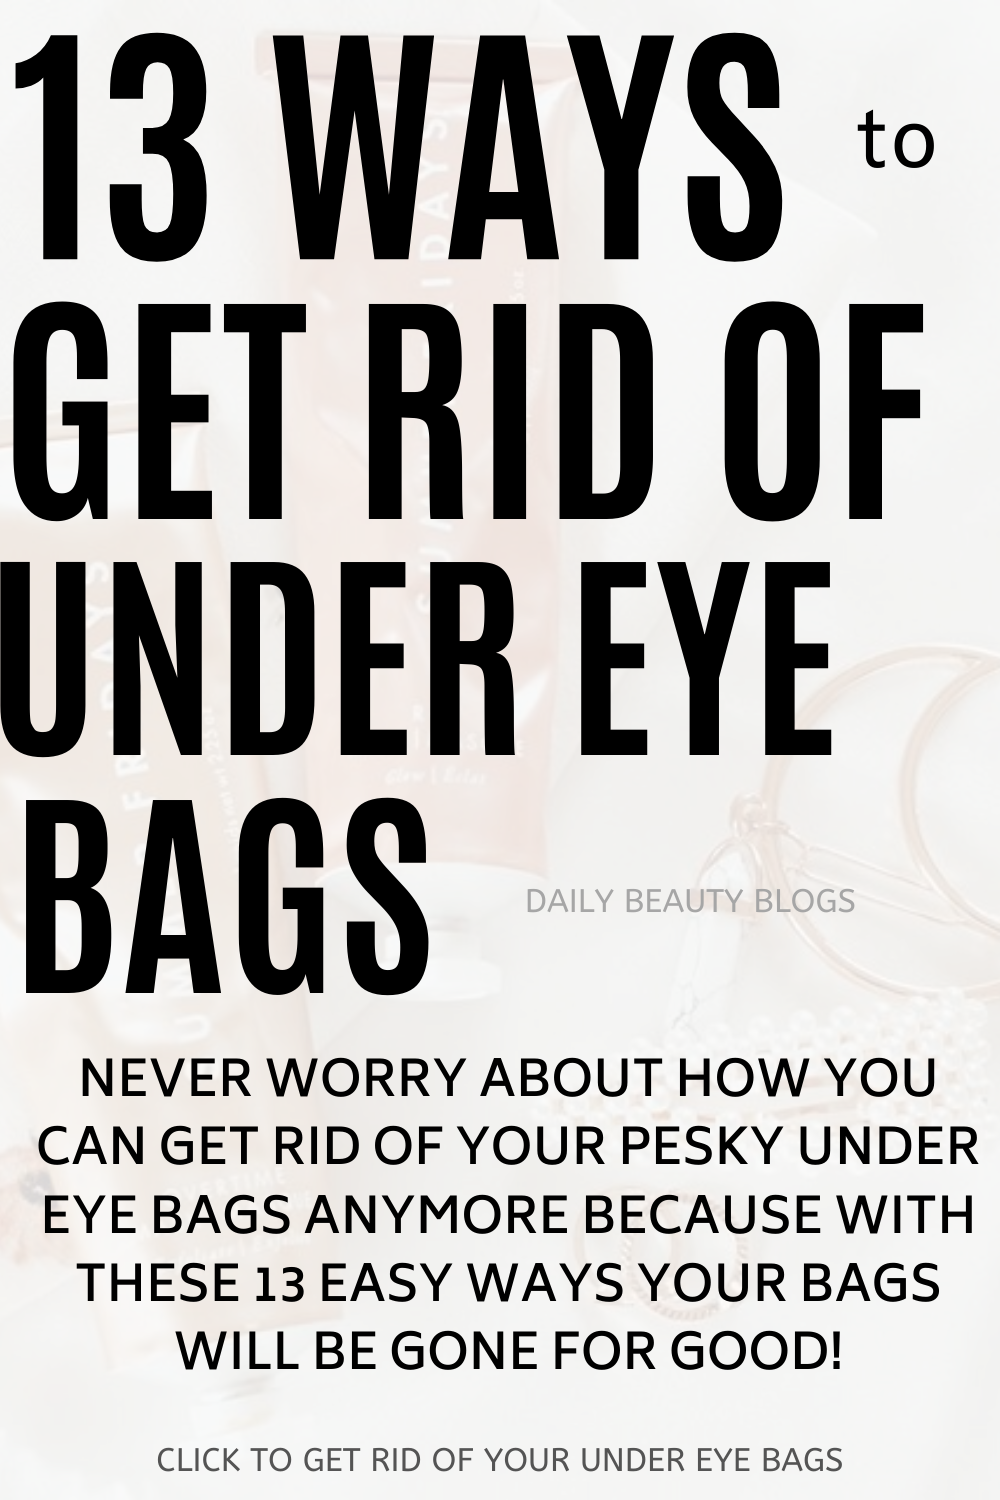 13 Ways to Get Rid of Under Eye Bags – Daily Beauty Blogs -   25 how to get rid of bags under eyes ideas